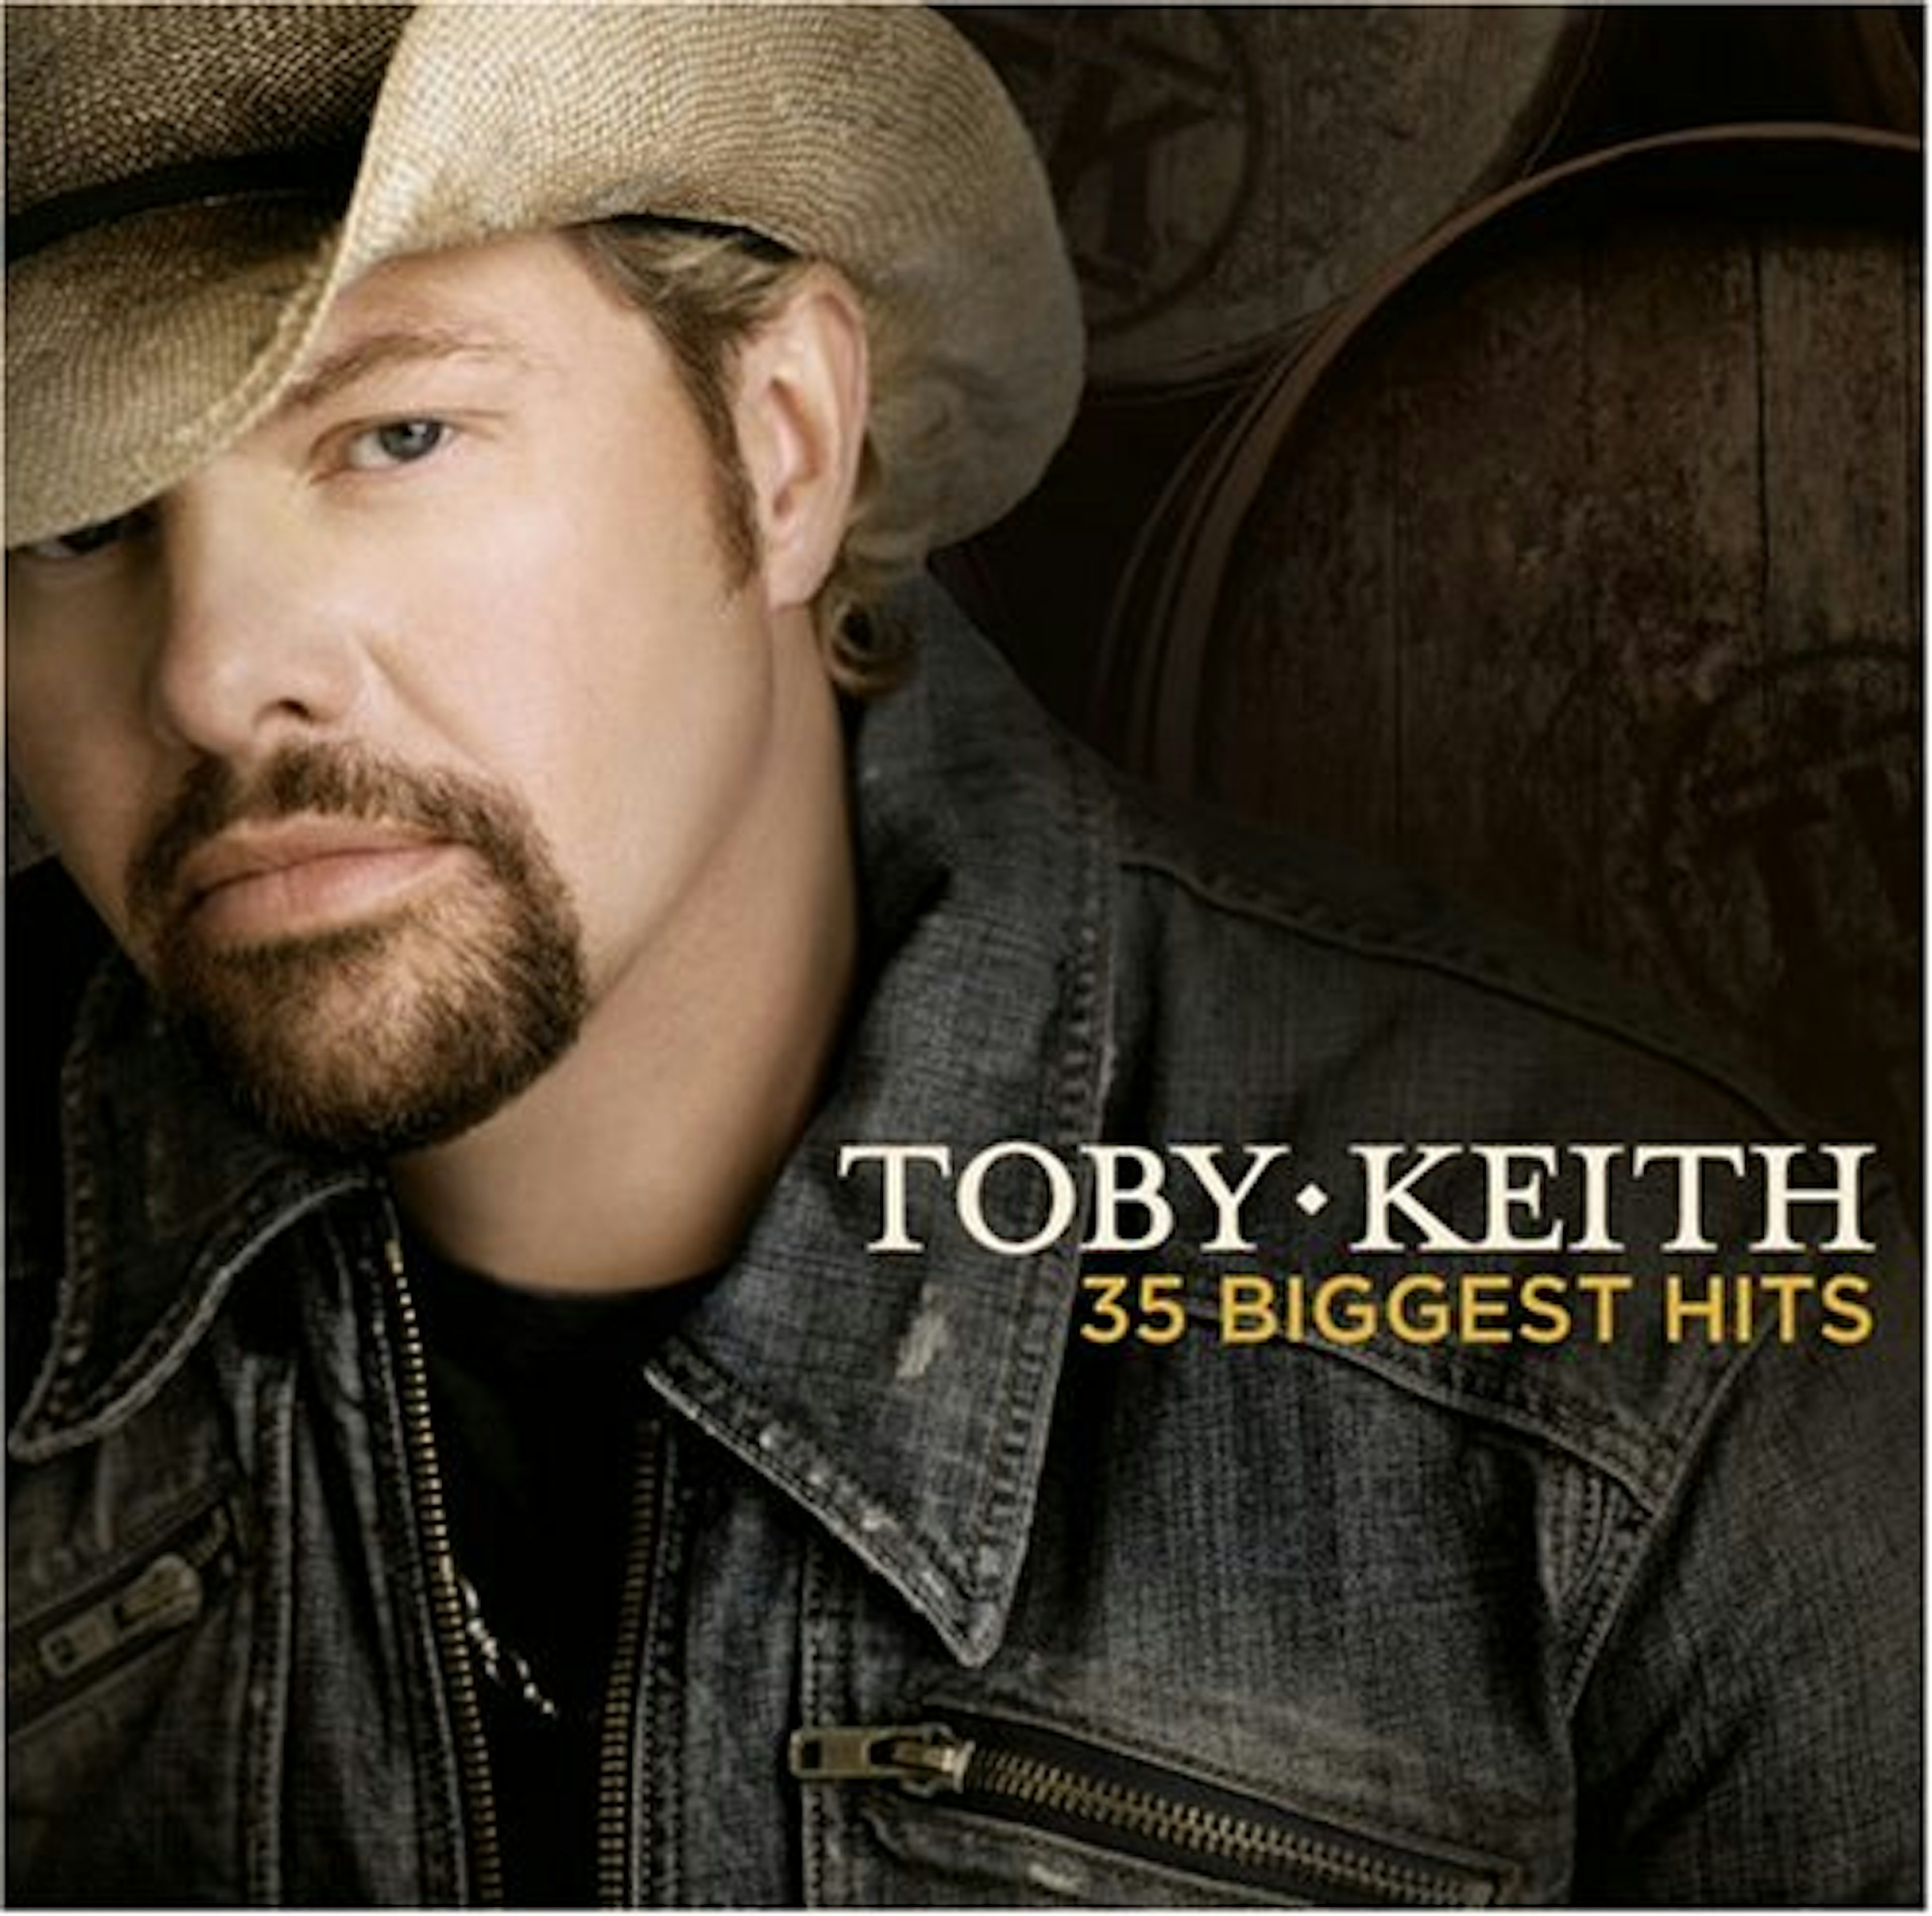 Toby Keith 35 BIGGEST HITS CD